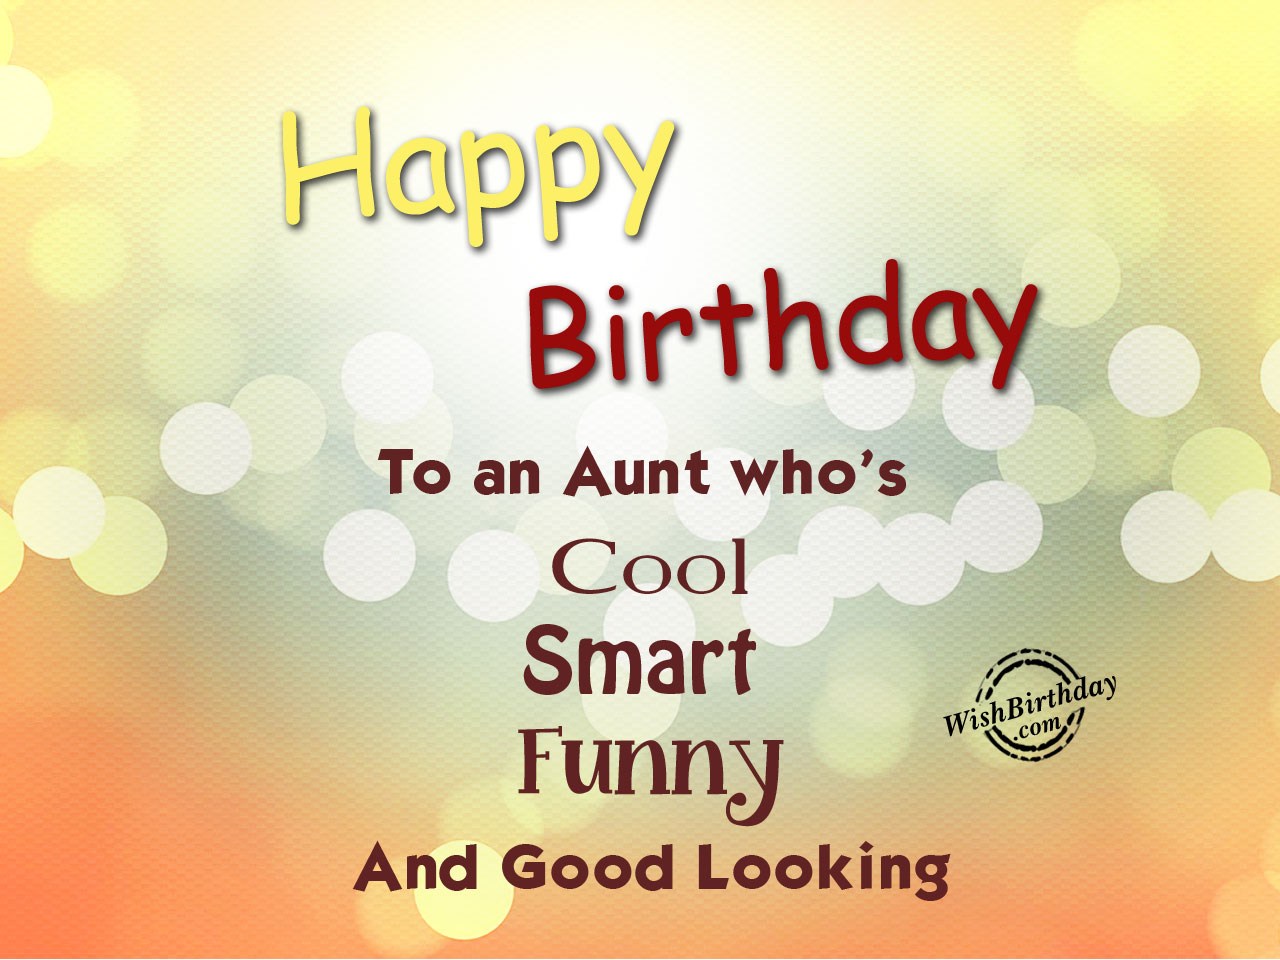 Happy Birthday to an aunt.